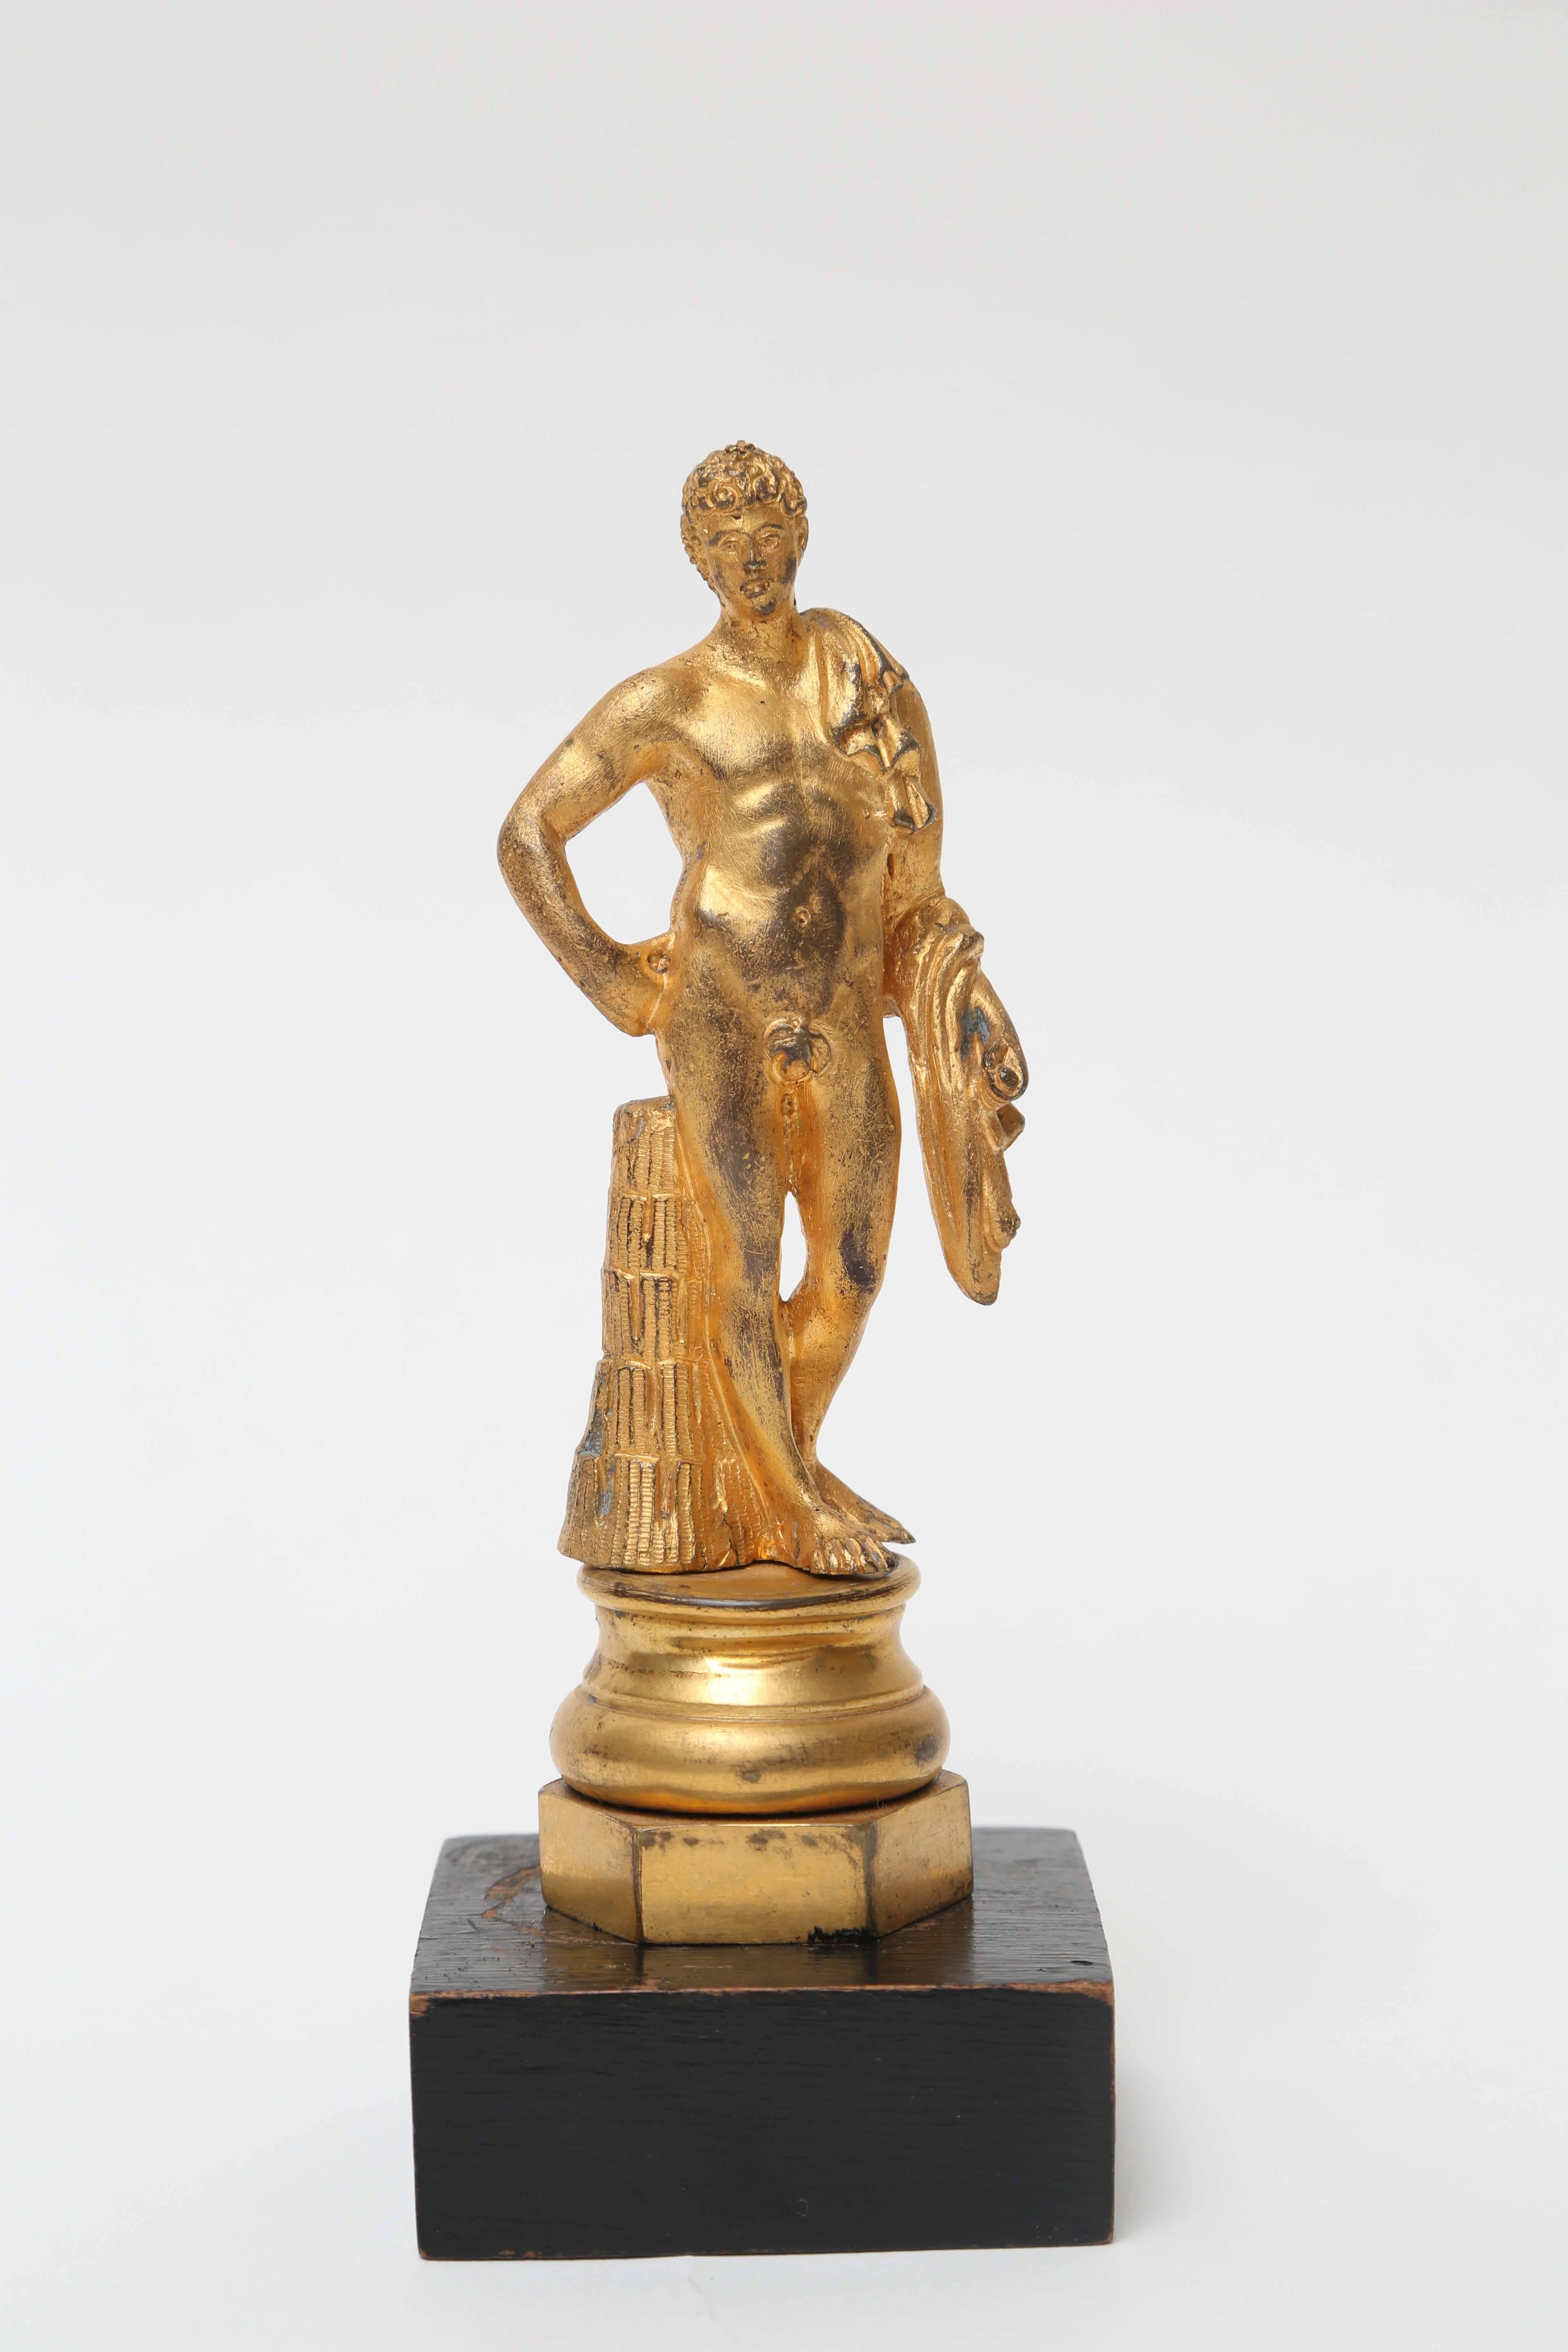 The gilt bronze figure of Antinous is mounted on a circular gilt bronze socle set on an hexagonal gilt bronze plinth attached to a wood base.